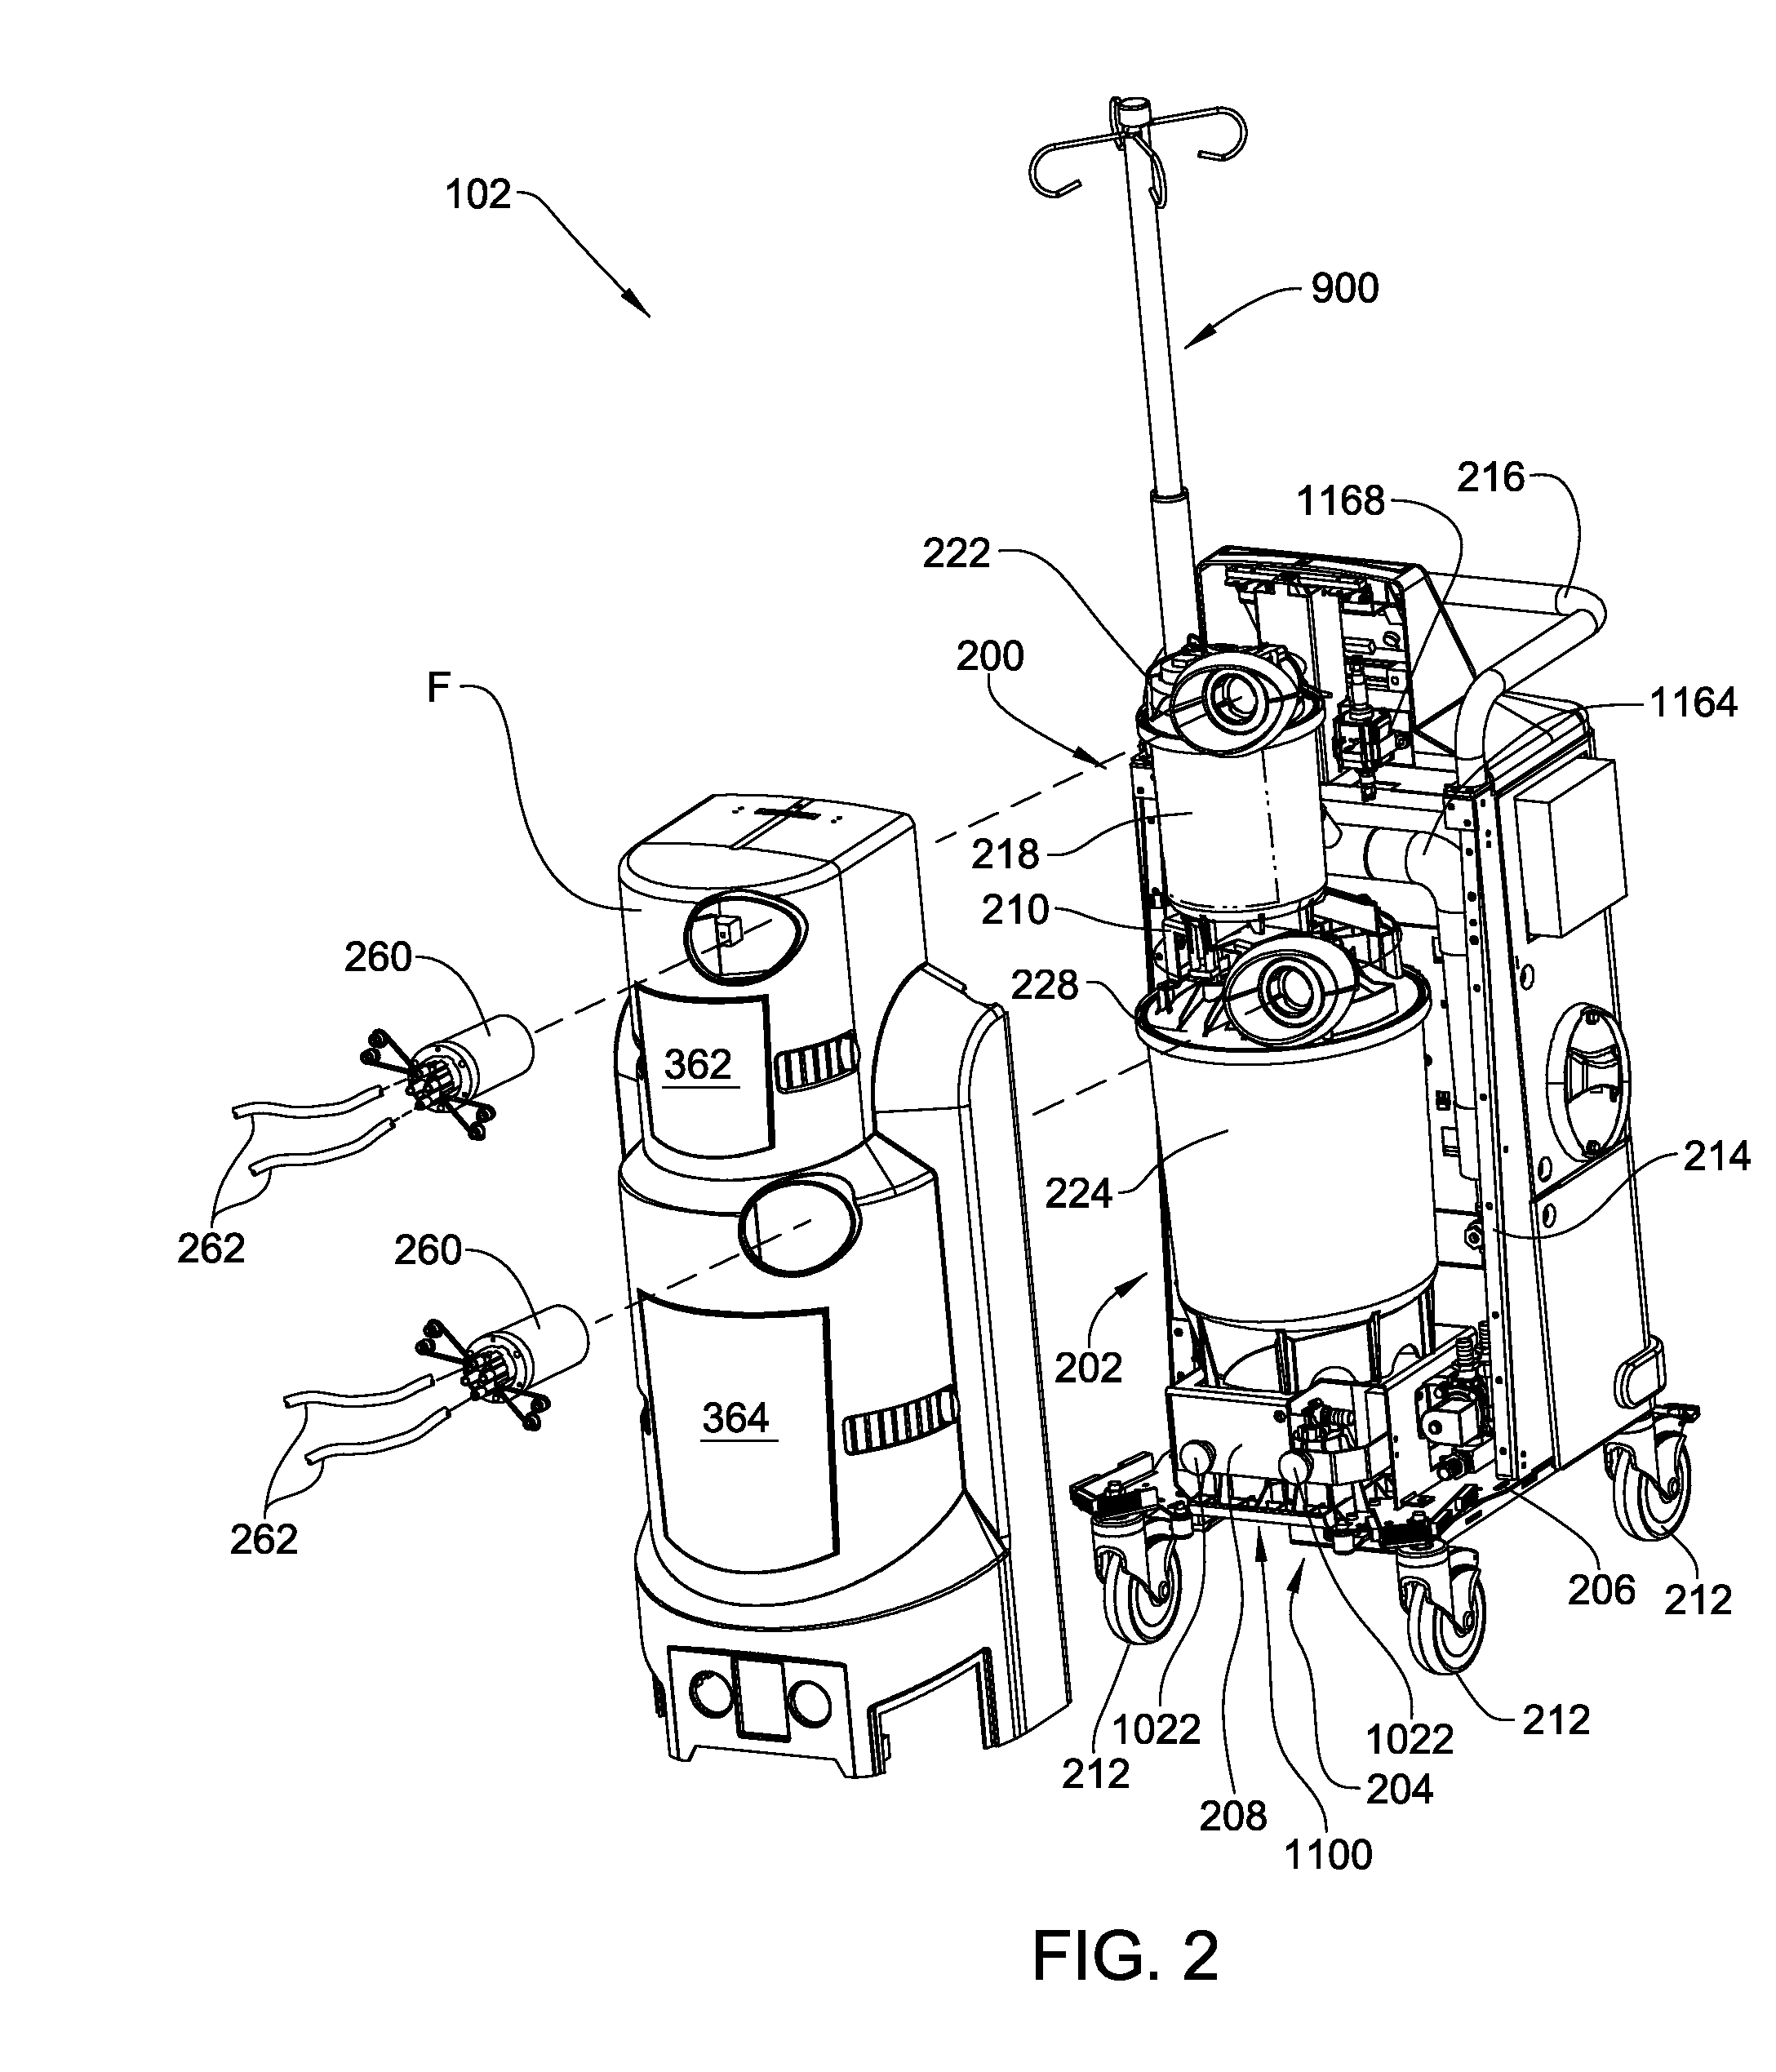 Medical/surgical waste collection unit including waste containers of different storage volumes with inter-container transfer valve and independently controlled vacuum levels